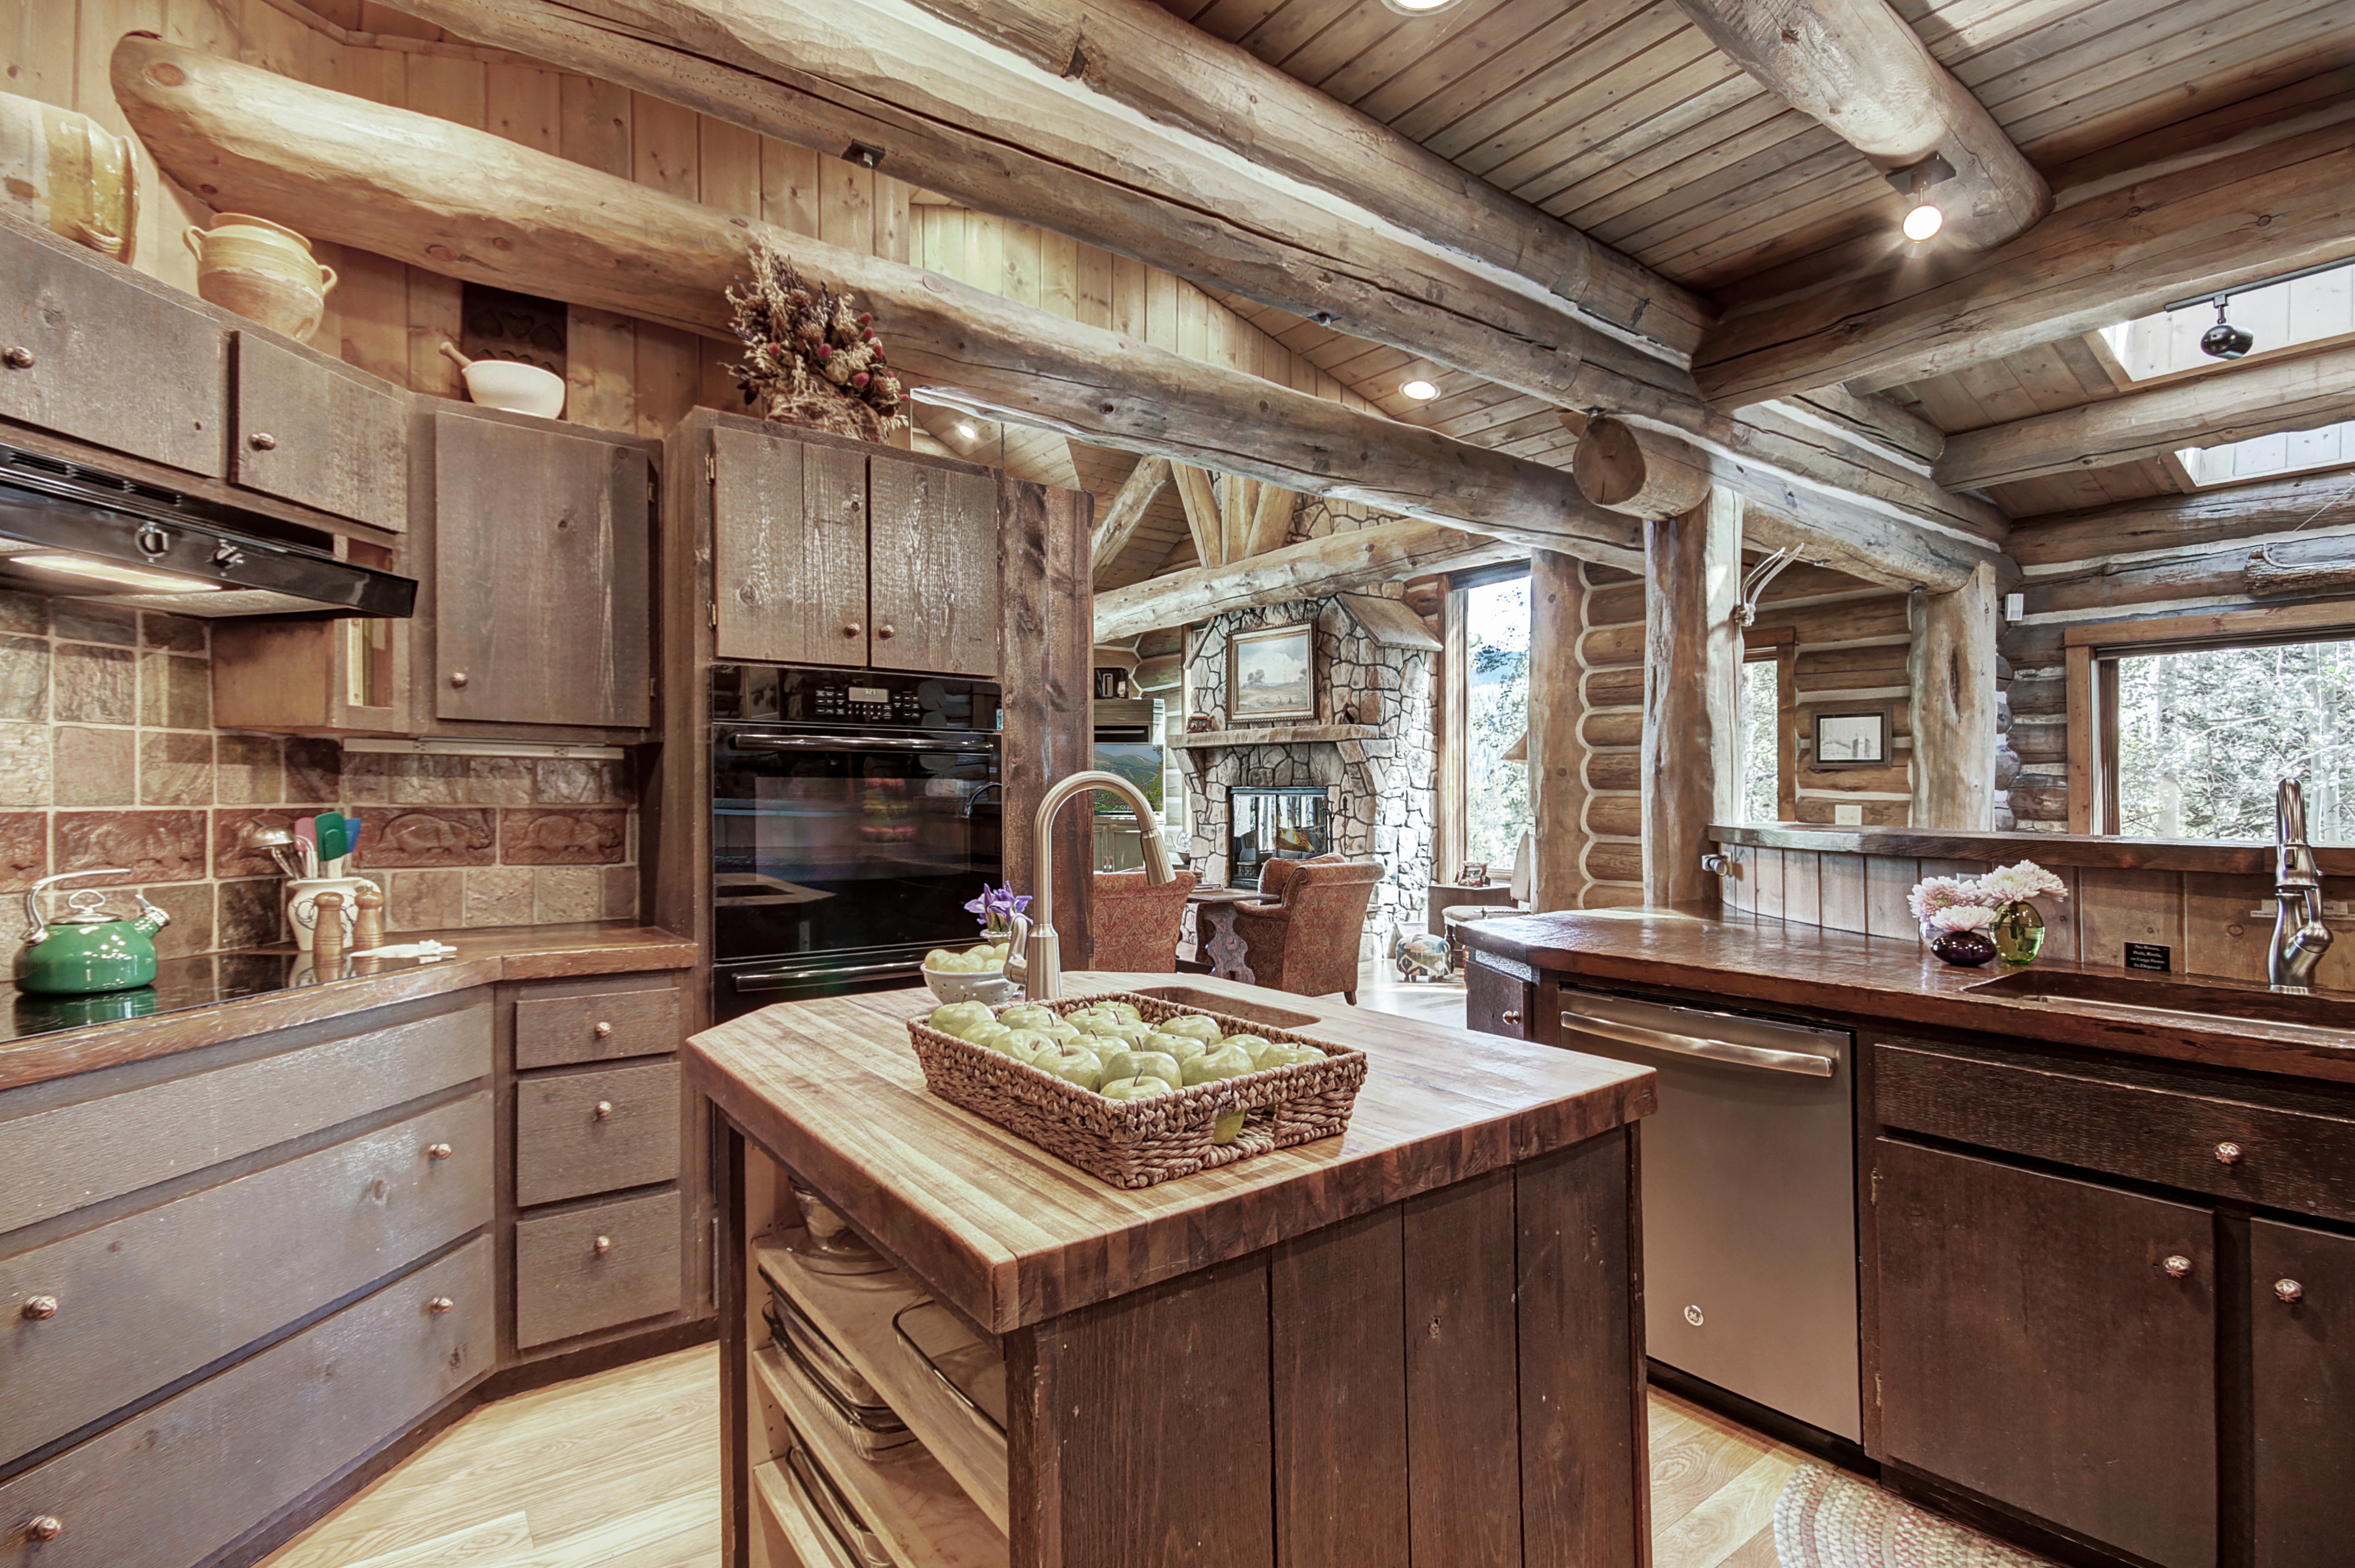 The island in the center of the kitchen offers a butcherblock counter - Bear Lodge Breckenridge Vacation Rental